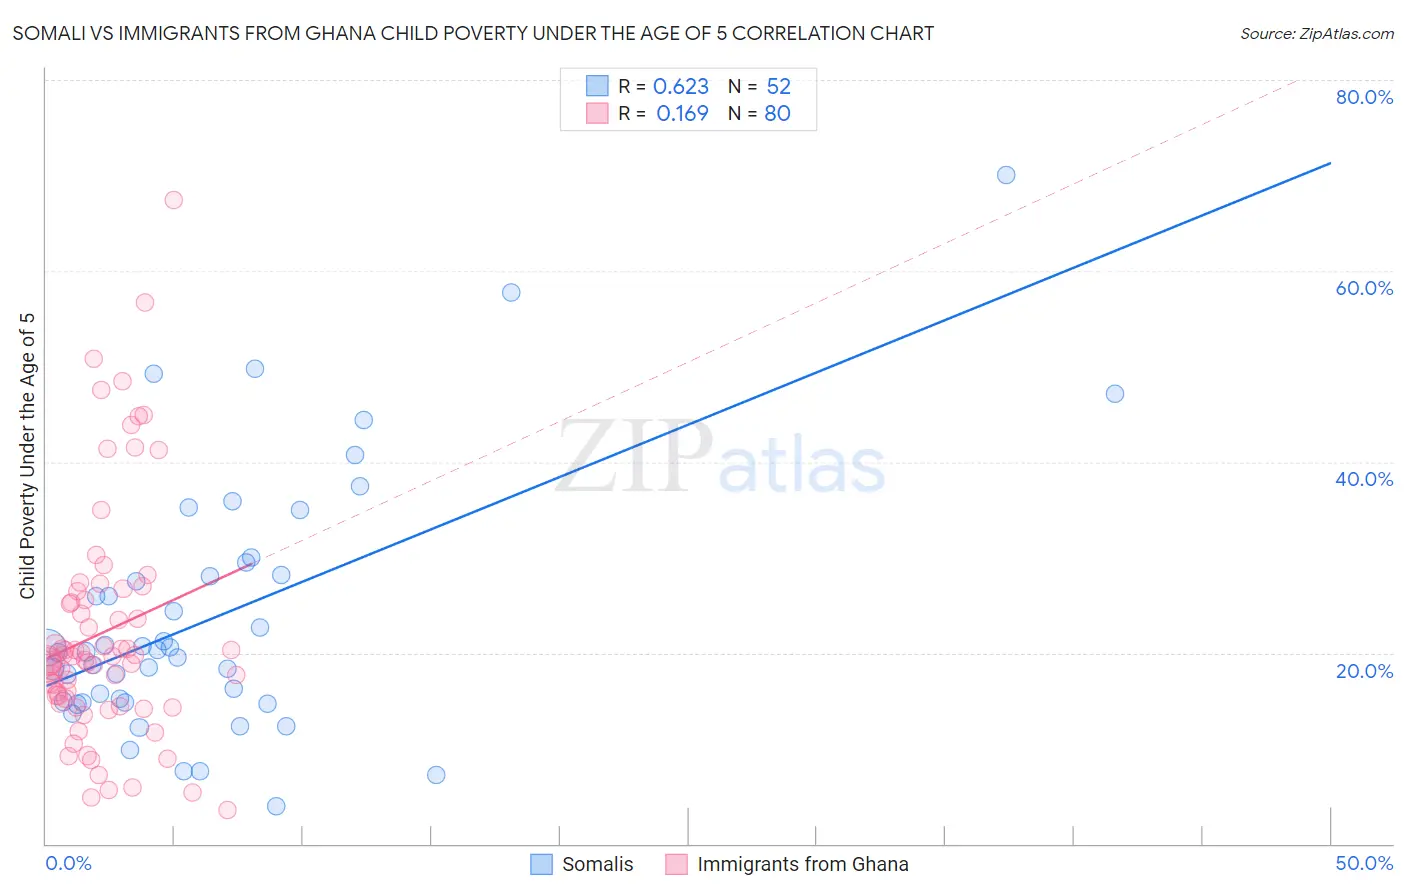 Somali vs Immigrants from Ghana Child Poverty Under the Age of 5